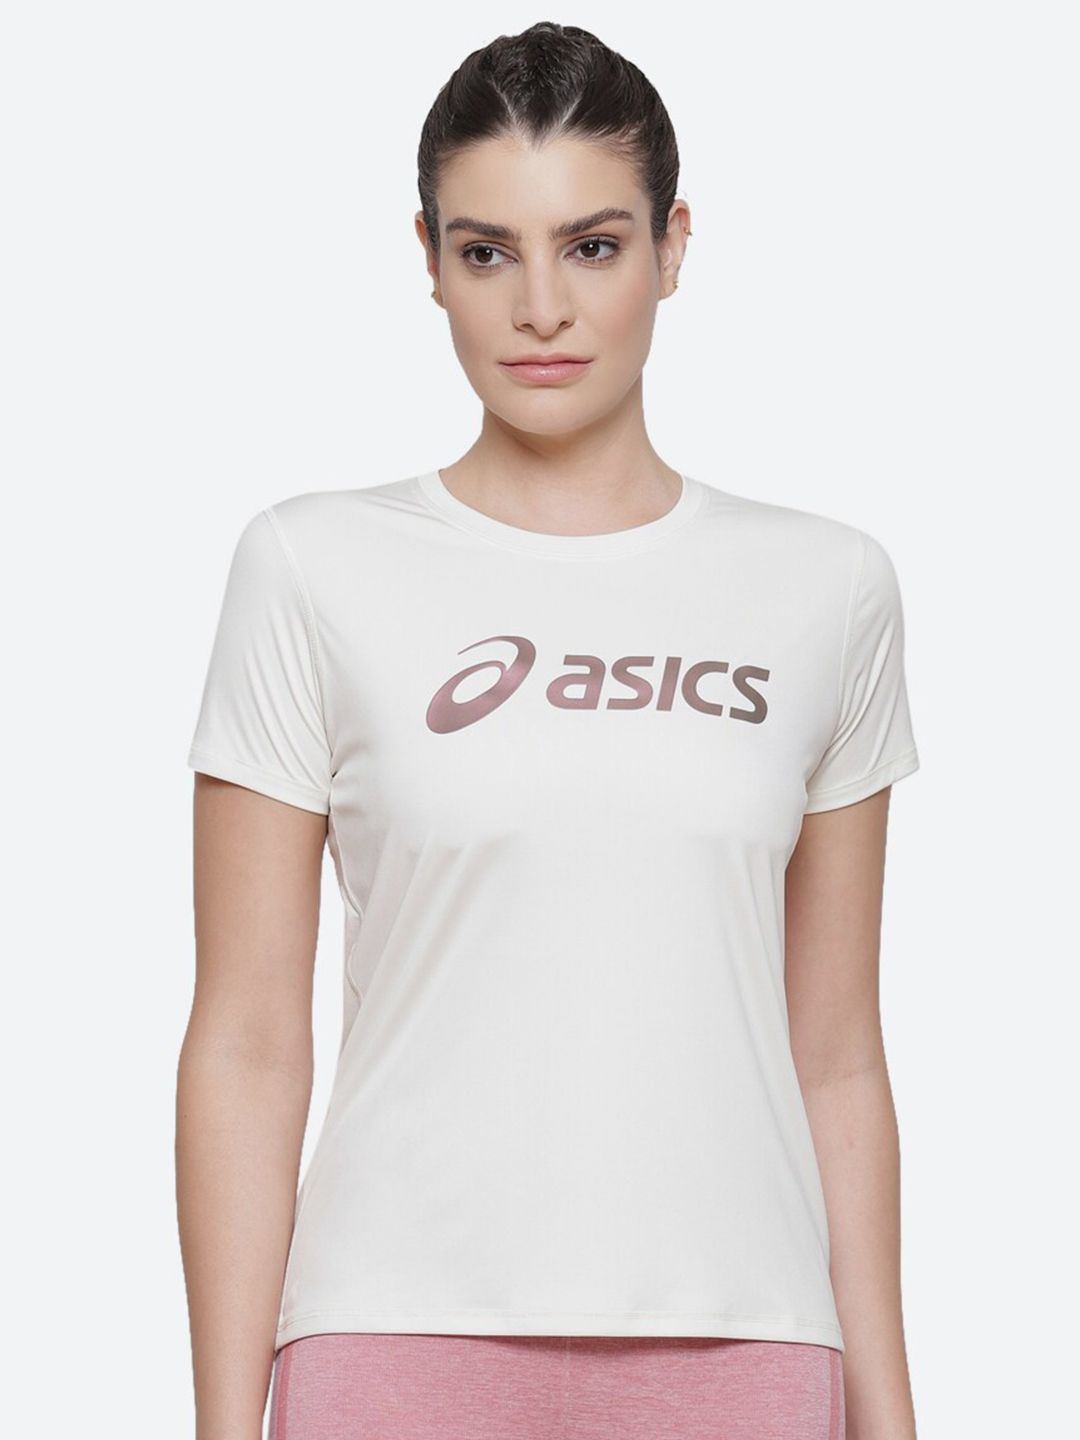 ASICS Women Off White Typography Printed SILVER NAGARE Running T-shirt Price in India